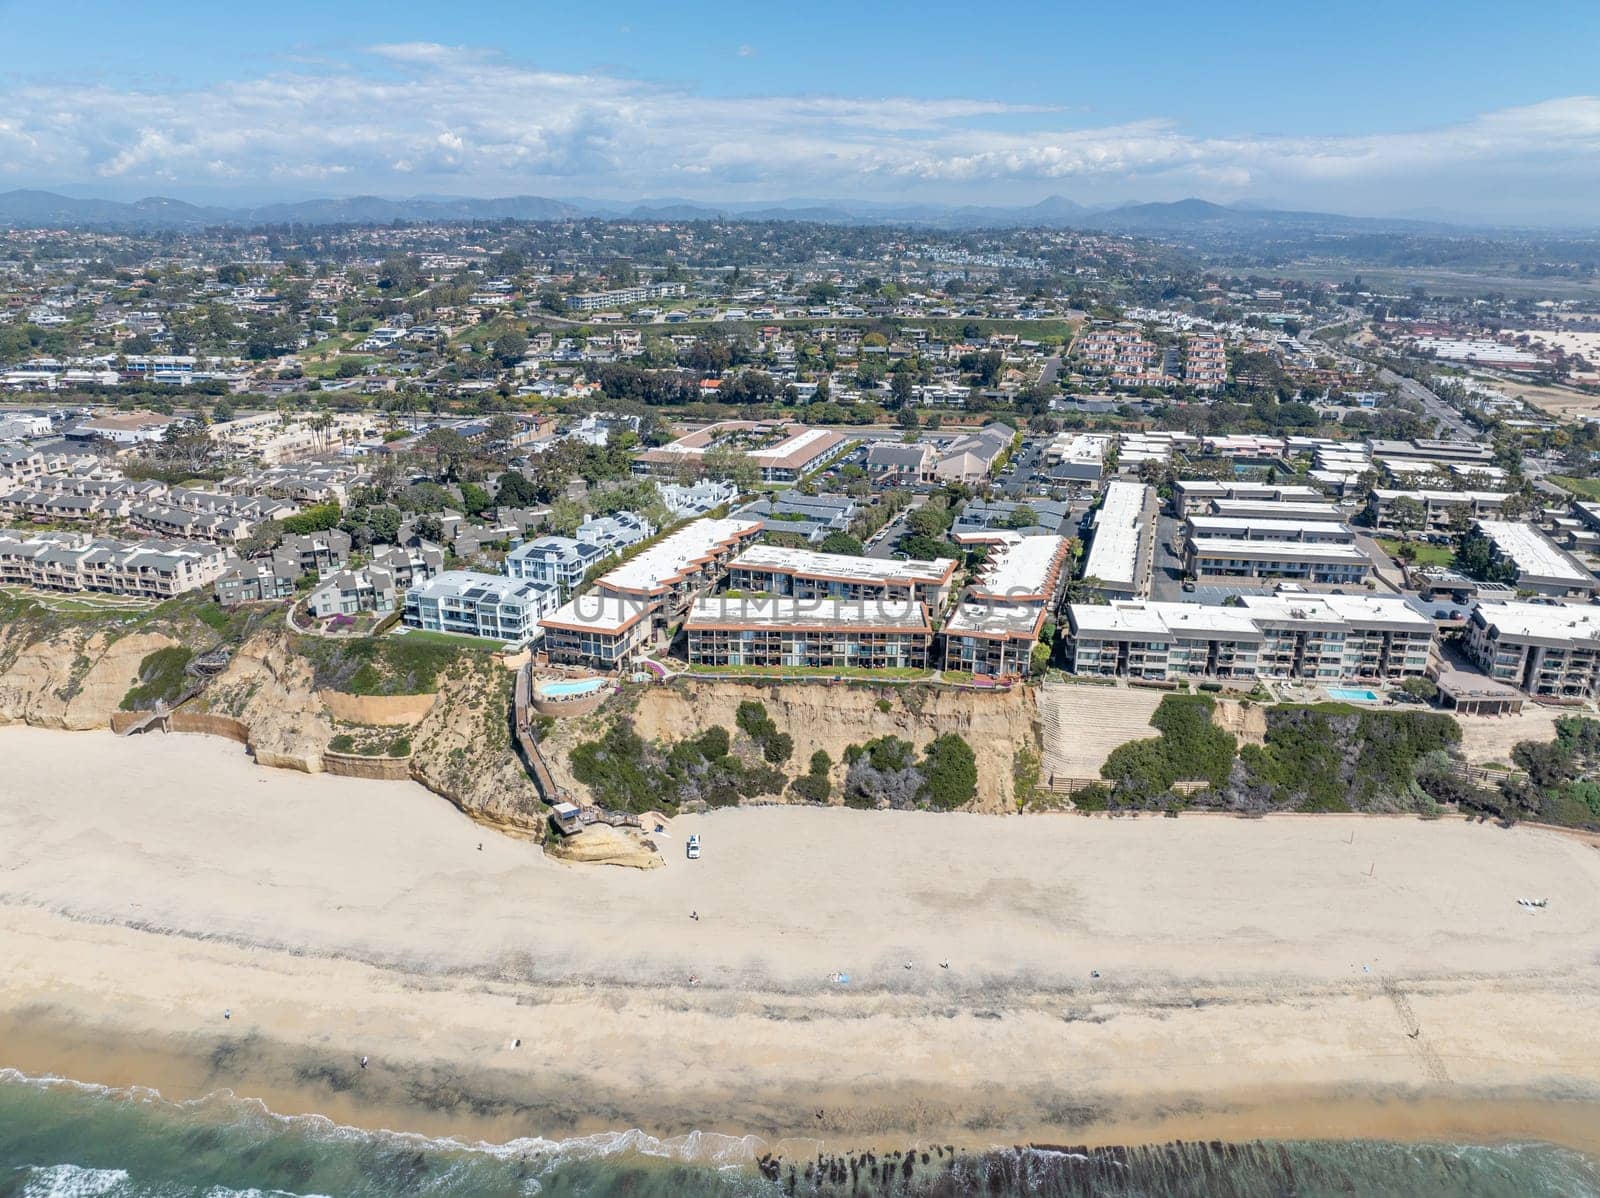 Aerial view of Del Mar Shores, California coastal cliffs and House with blue Pacific ocean. San Diego County, California, USA